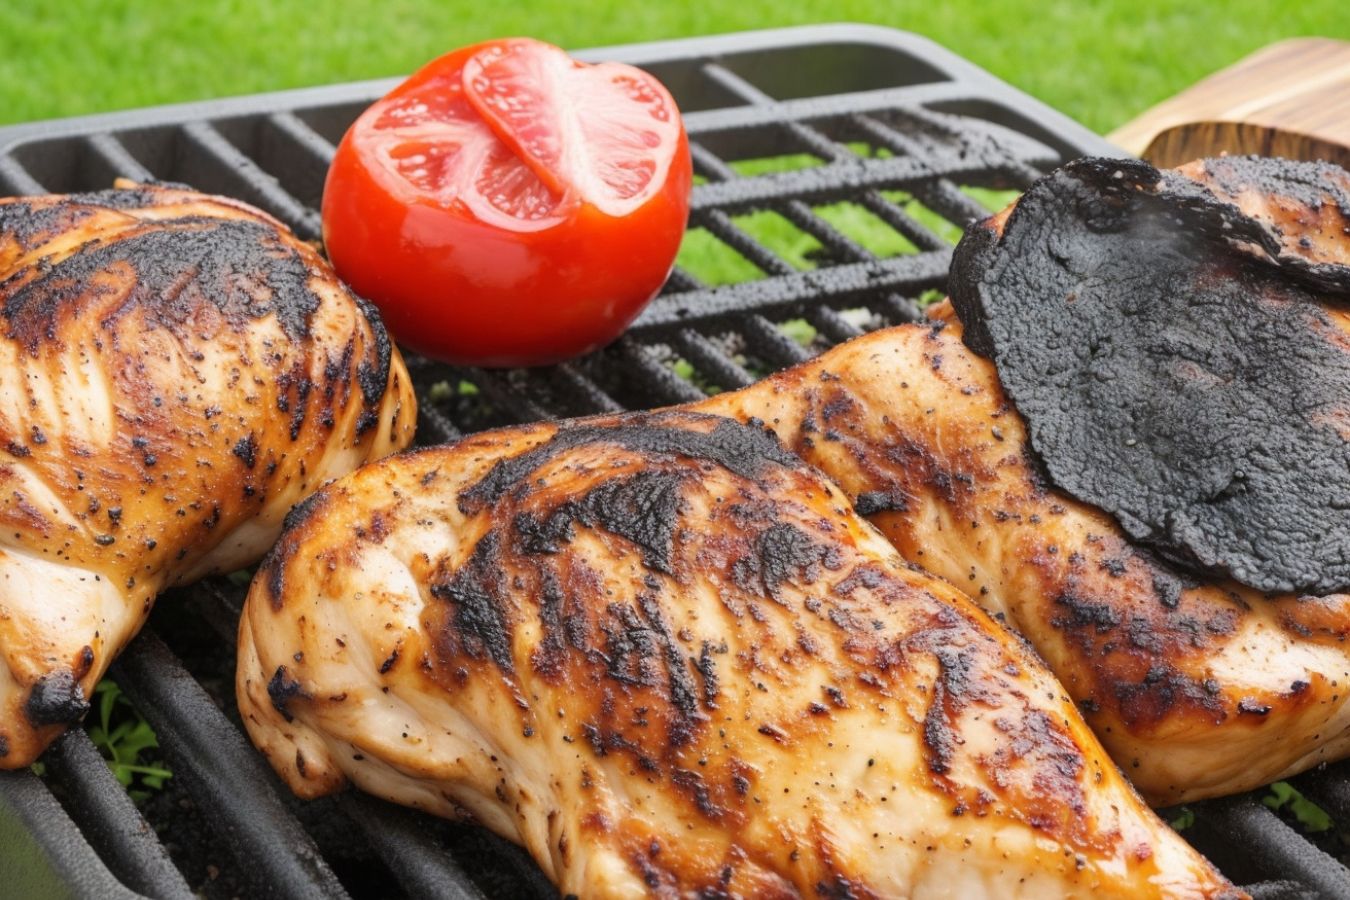 Charcoal Vs Gas Grilling Chicken